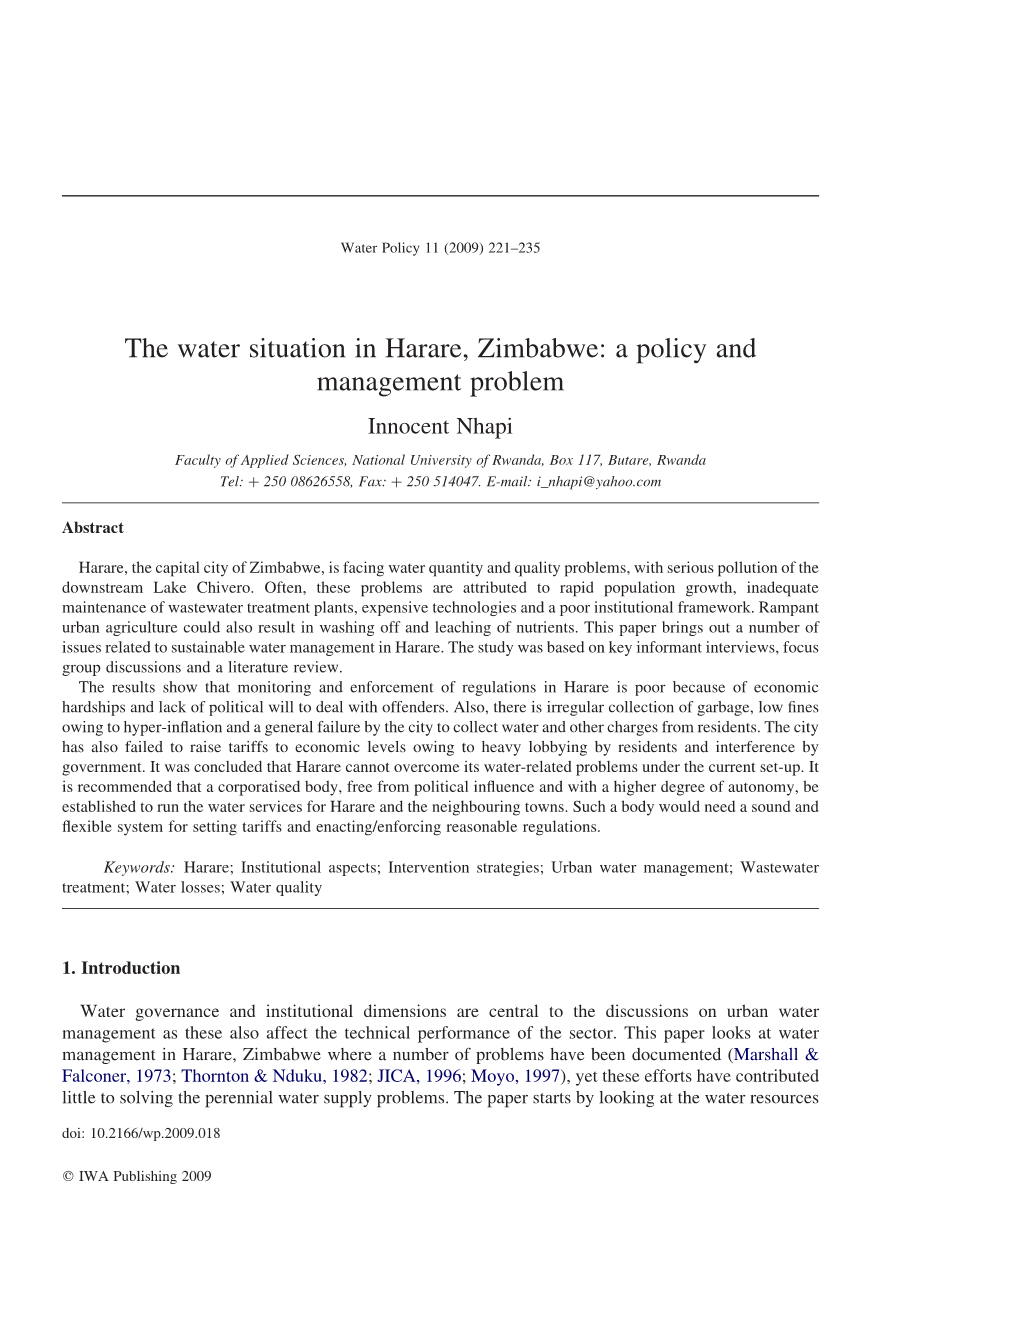 The Water Situation in Harare, Zimbabwe: a Policy And